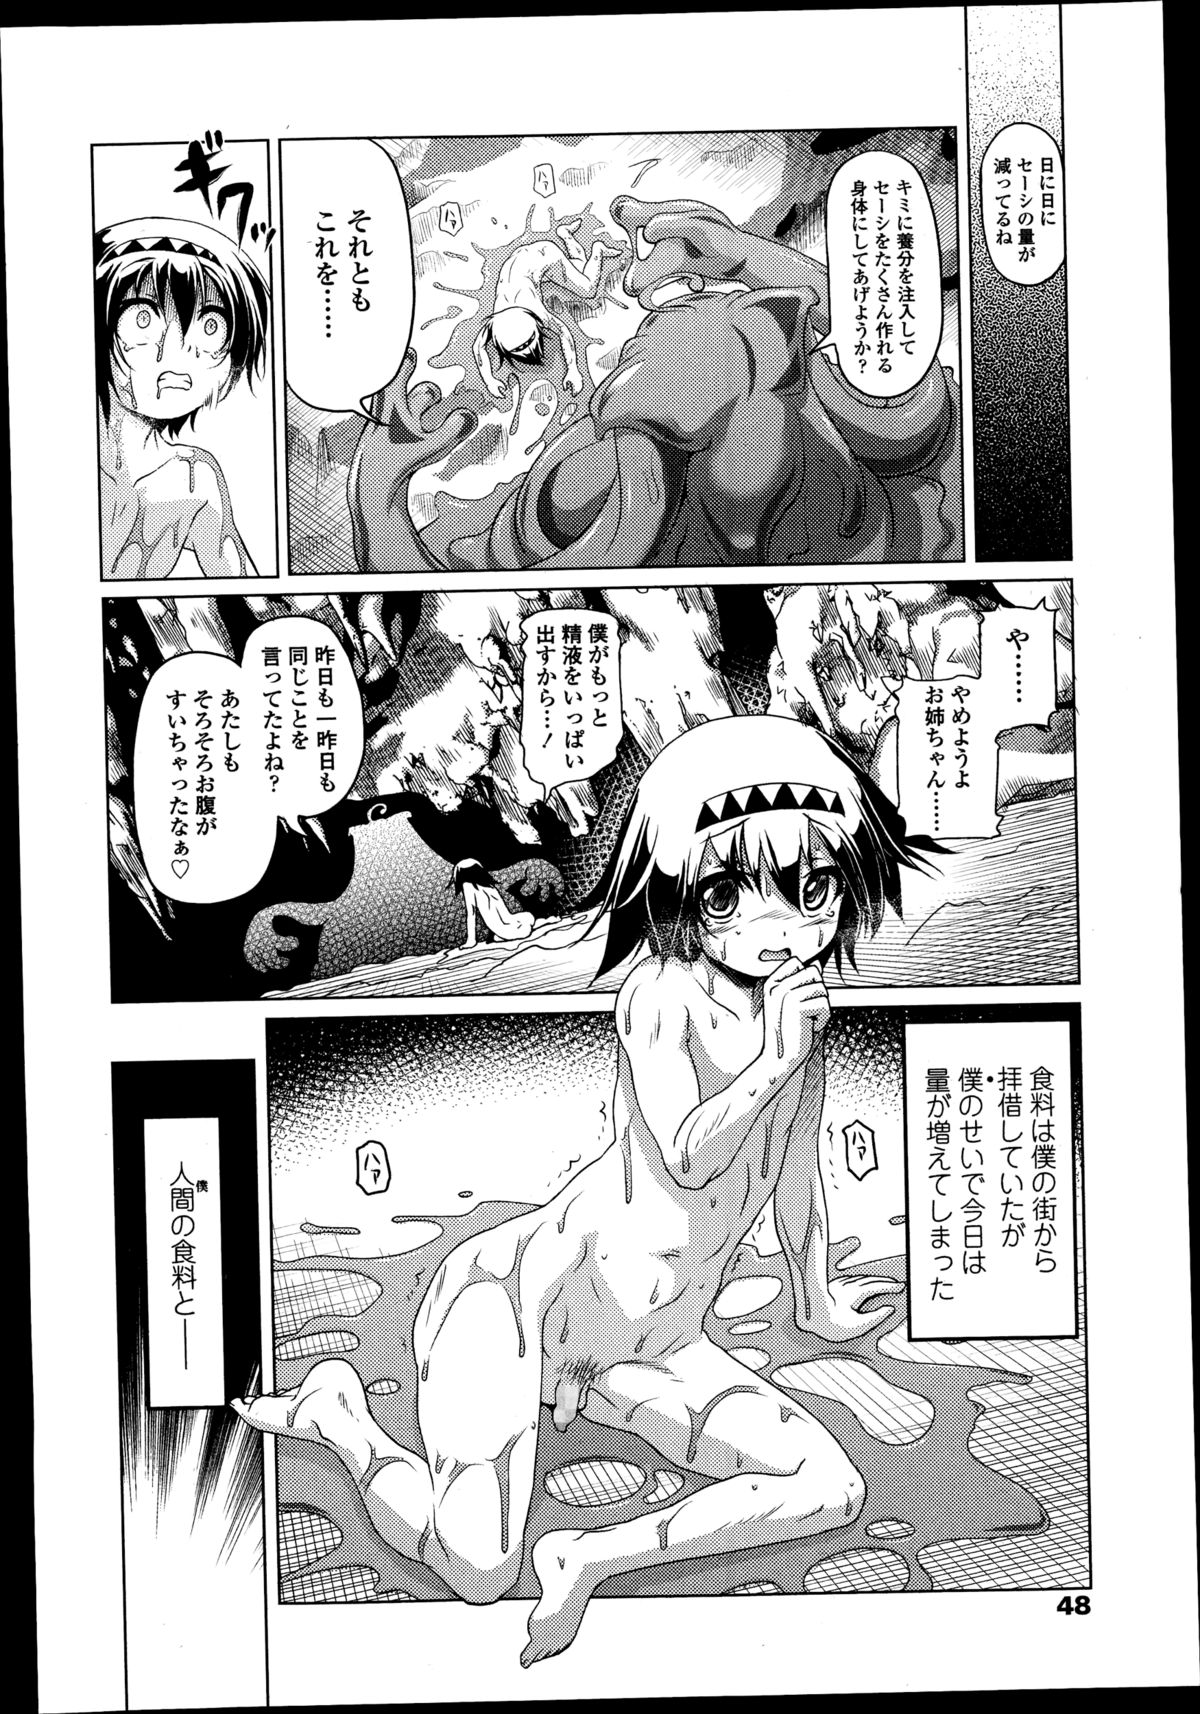 Girls forM Vol. 08 page 48 full